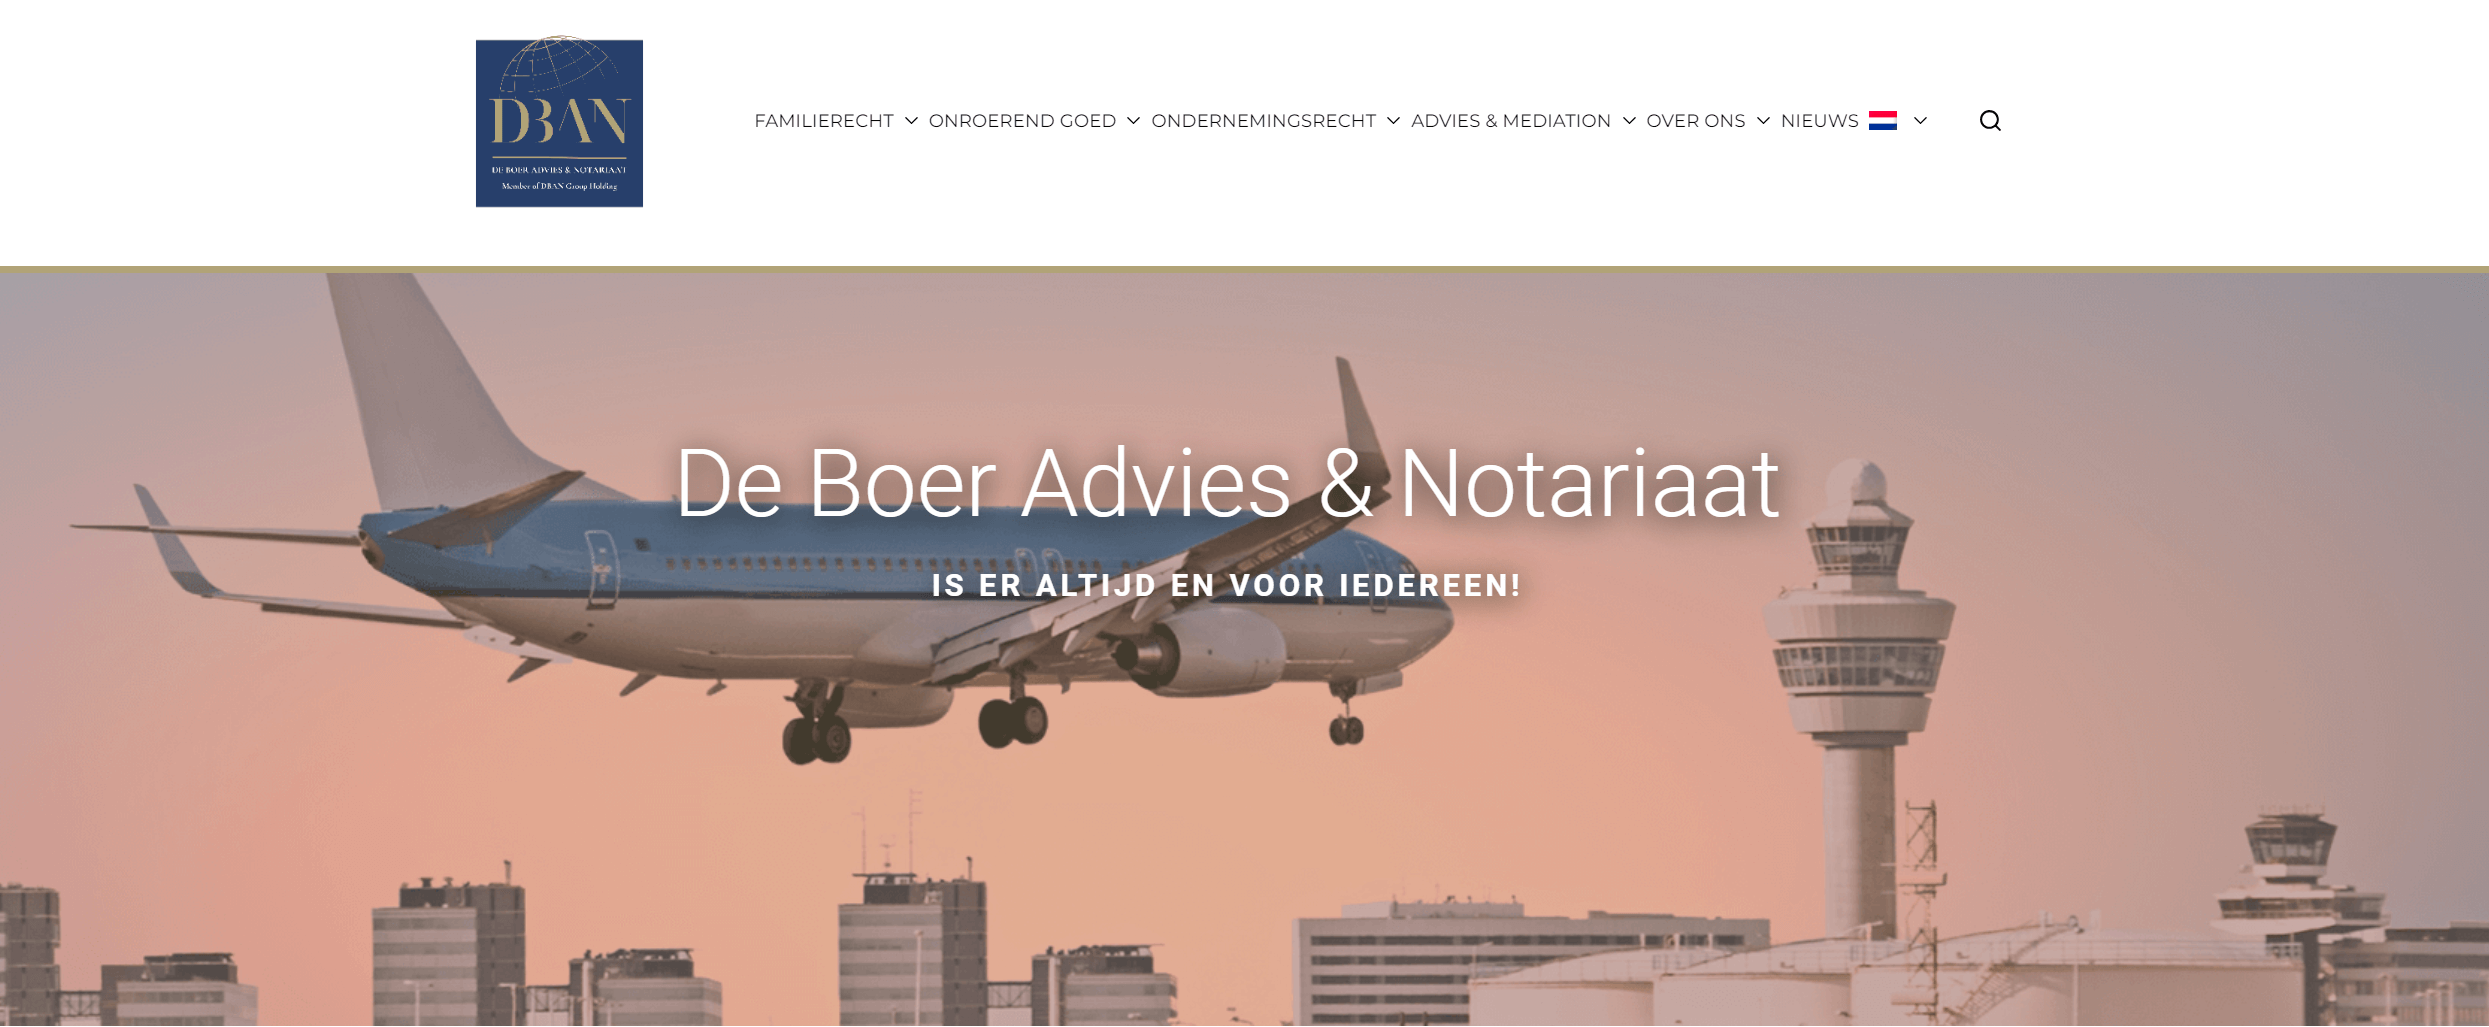 de boer advies and notariaart digital signage for offices